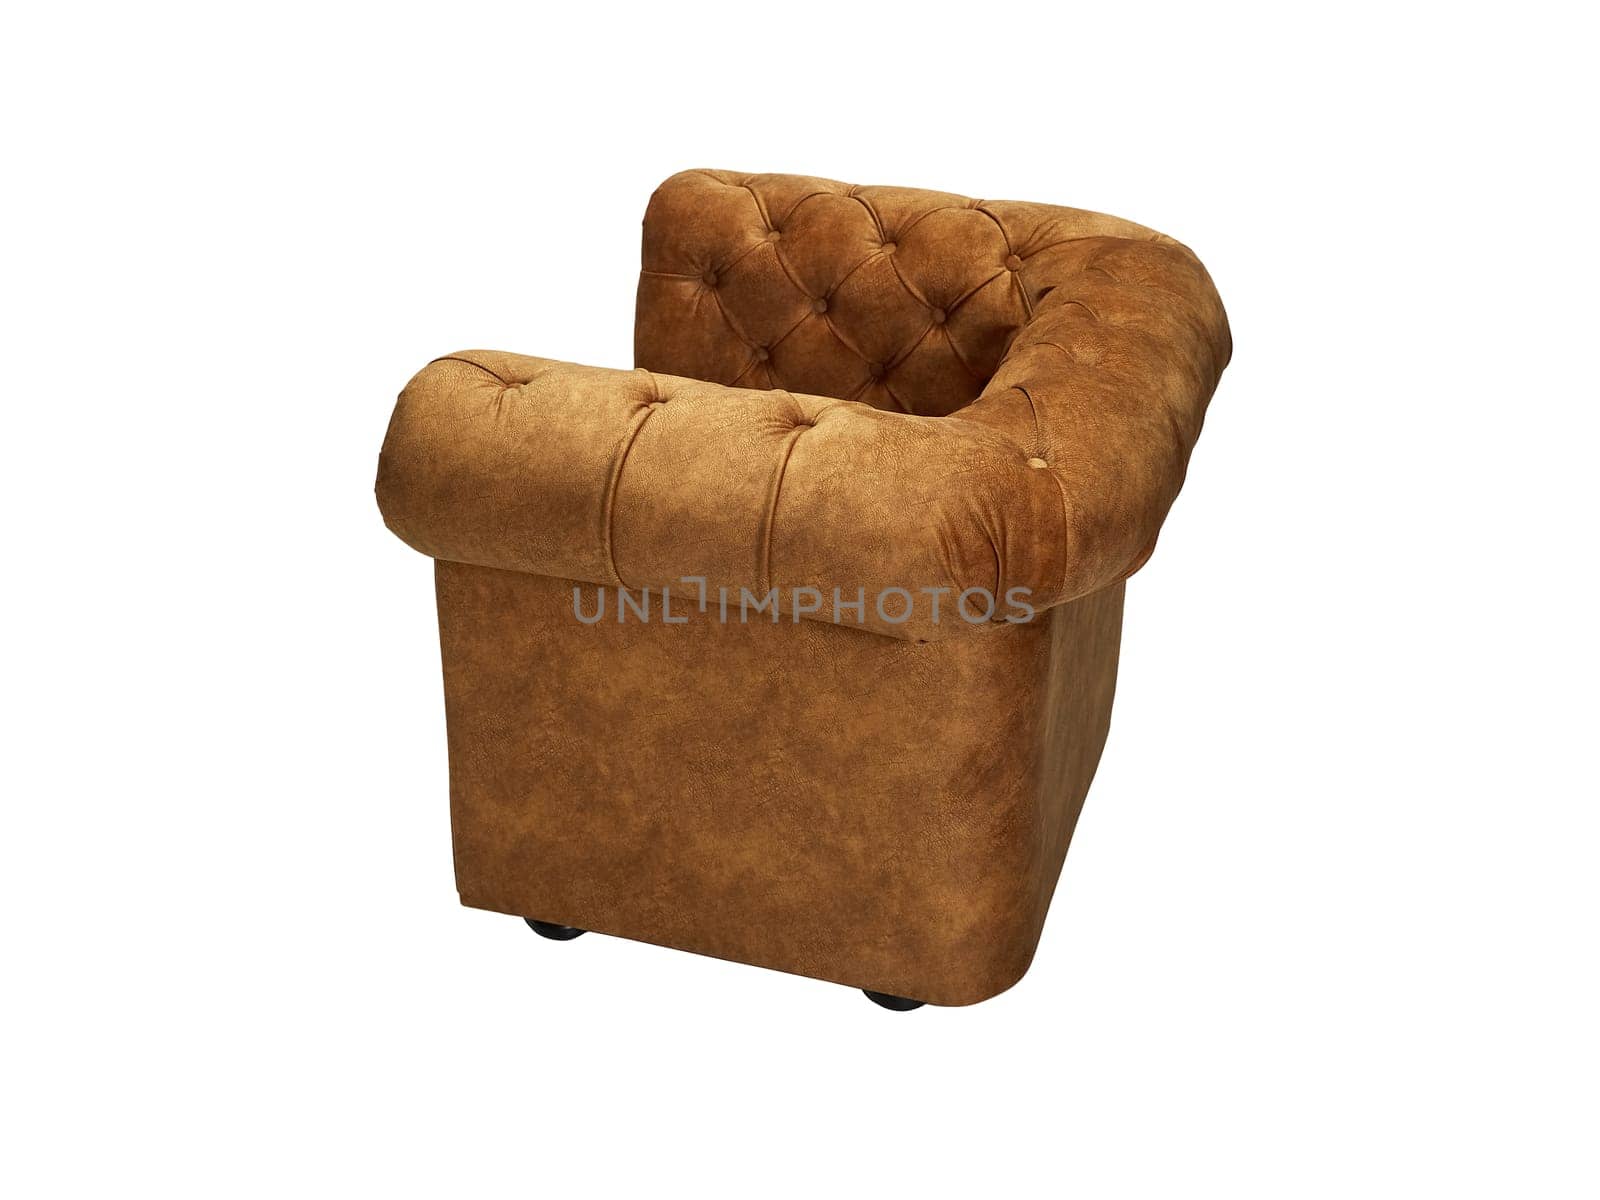 vintage brown leather armchair isolated on white background, back view by artemzatsepilin